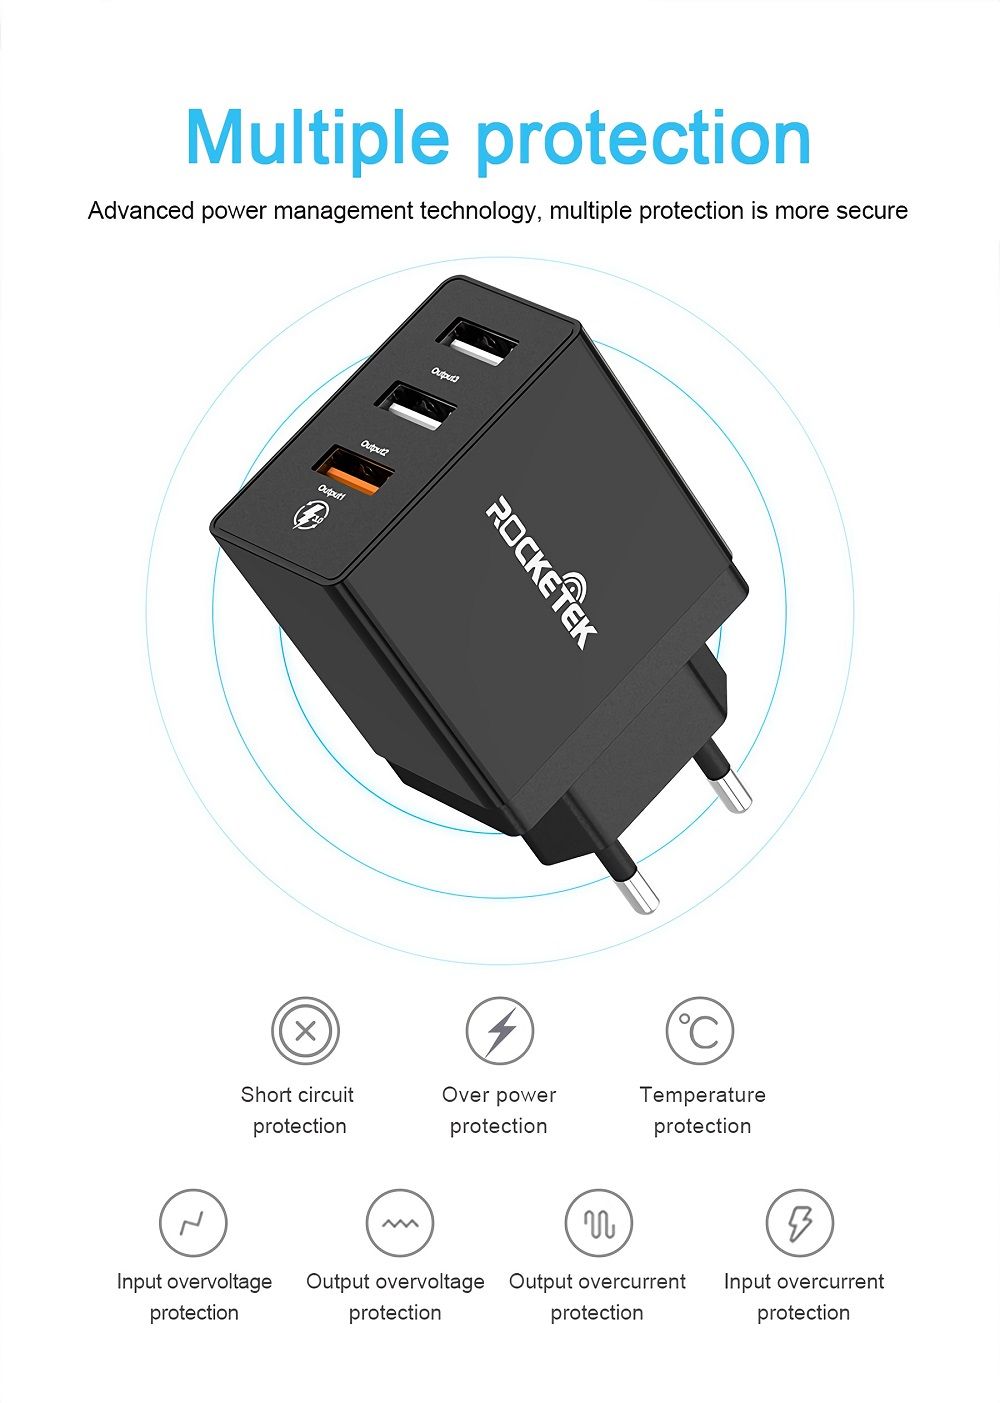 Rocketek-3-Ports-30W-QC30-24A-QC-Fast-Charging-USB-Charger-Power-Adapter-for-Samsung-Huawei-Smartpho-1686189